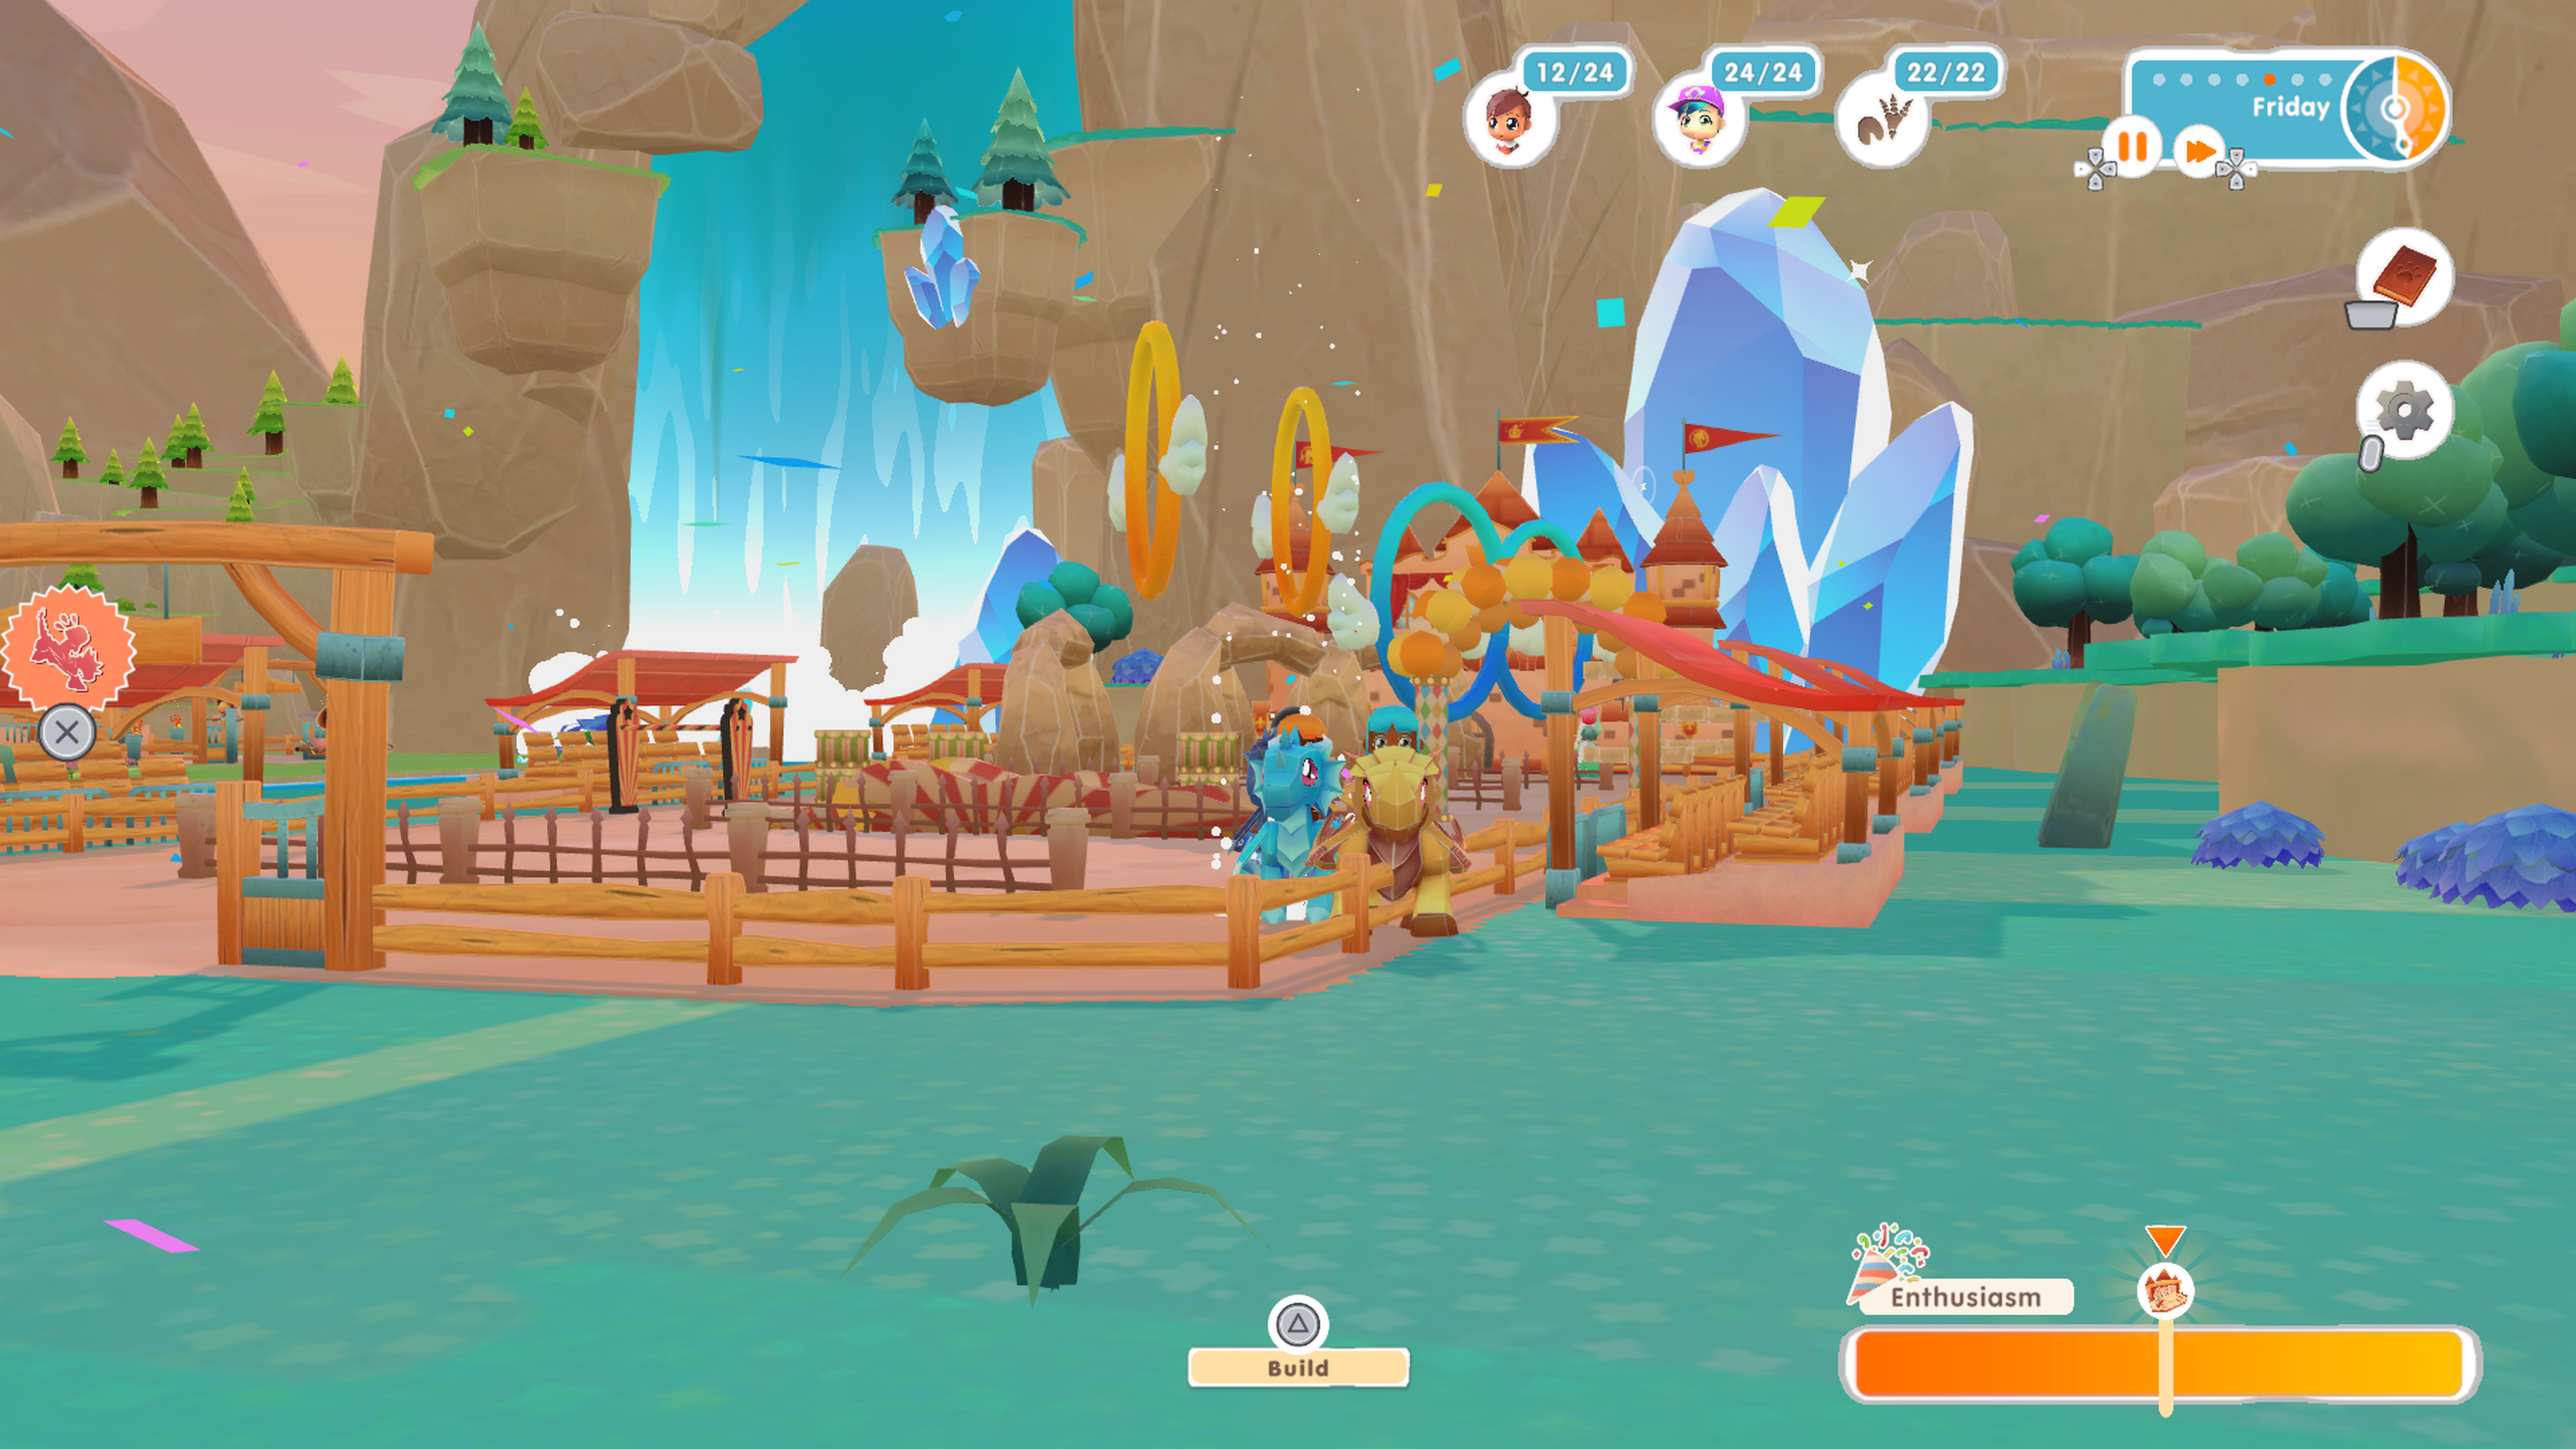 close up view of 2 dragons, one gold and one turquoise colour, participating in a festival on the ranch. The bottom right of the image shows an enthusiasm meter which must be filled to a certain point to begin the festival. 